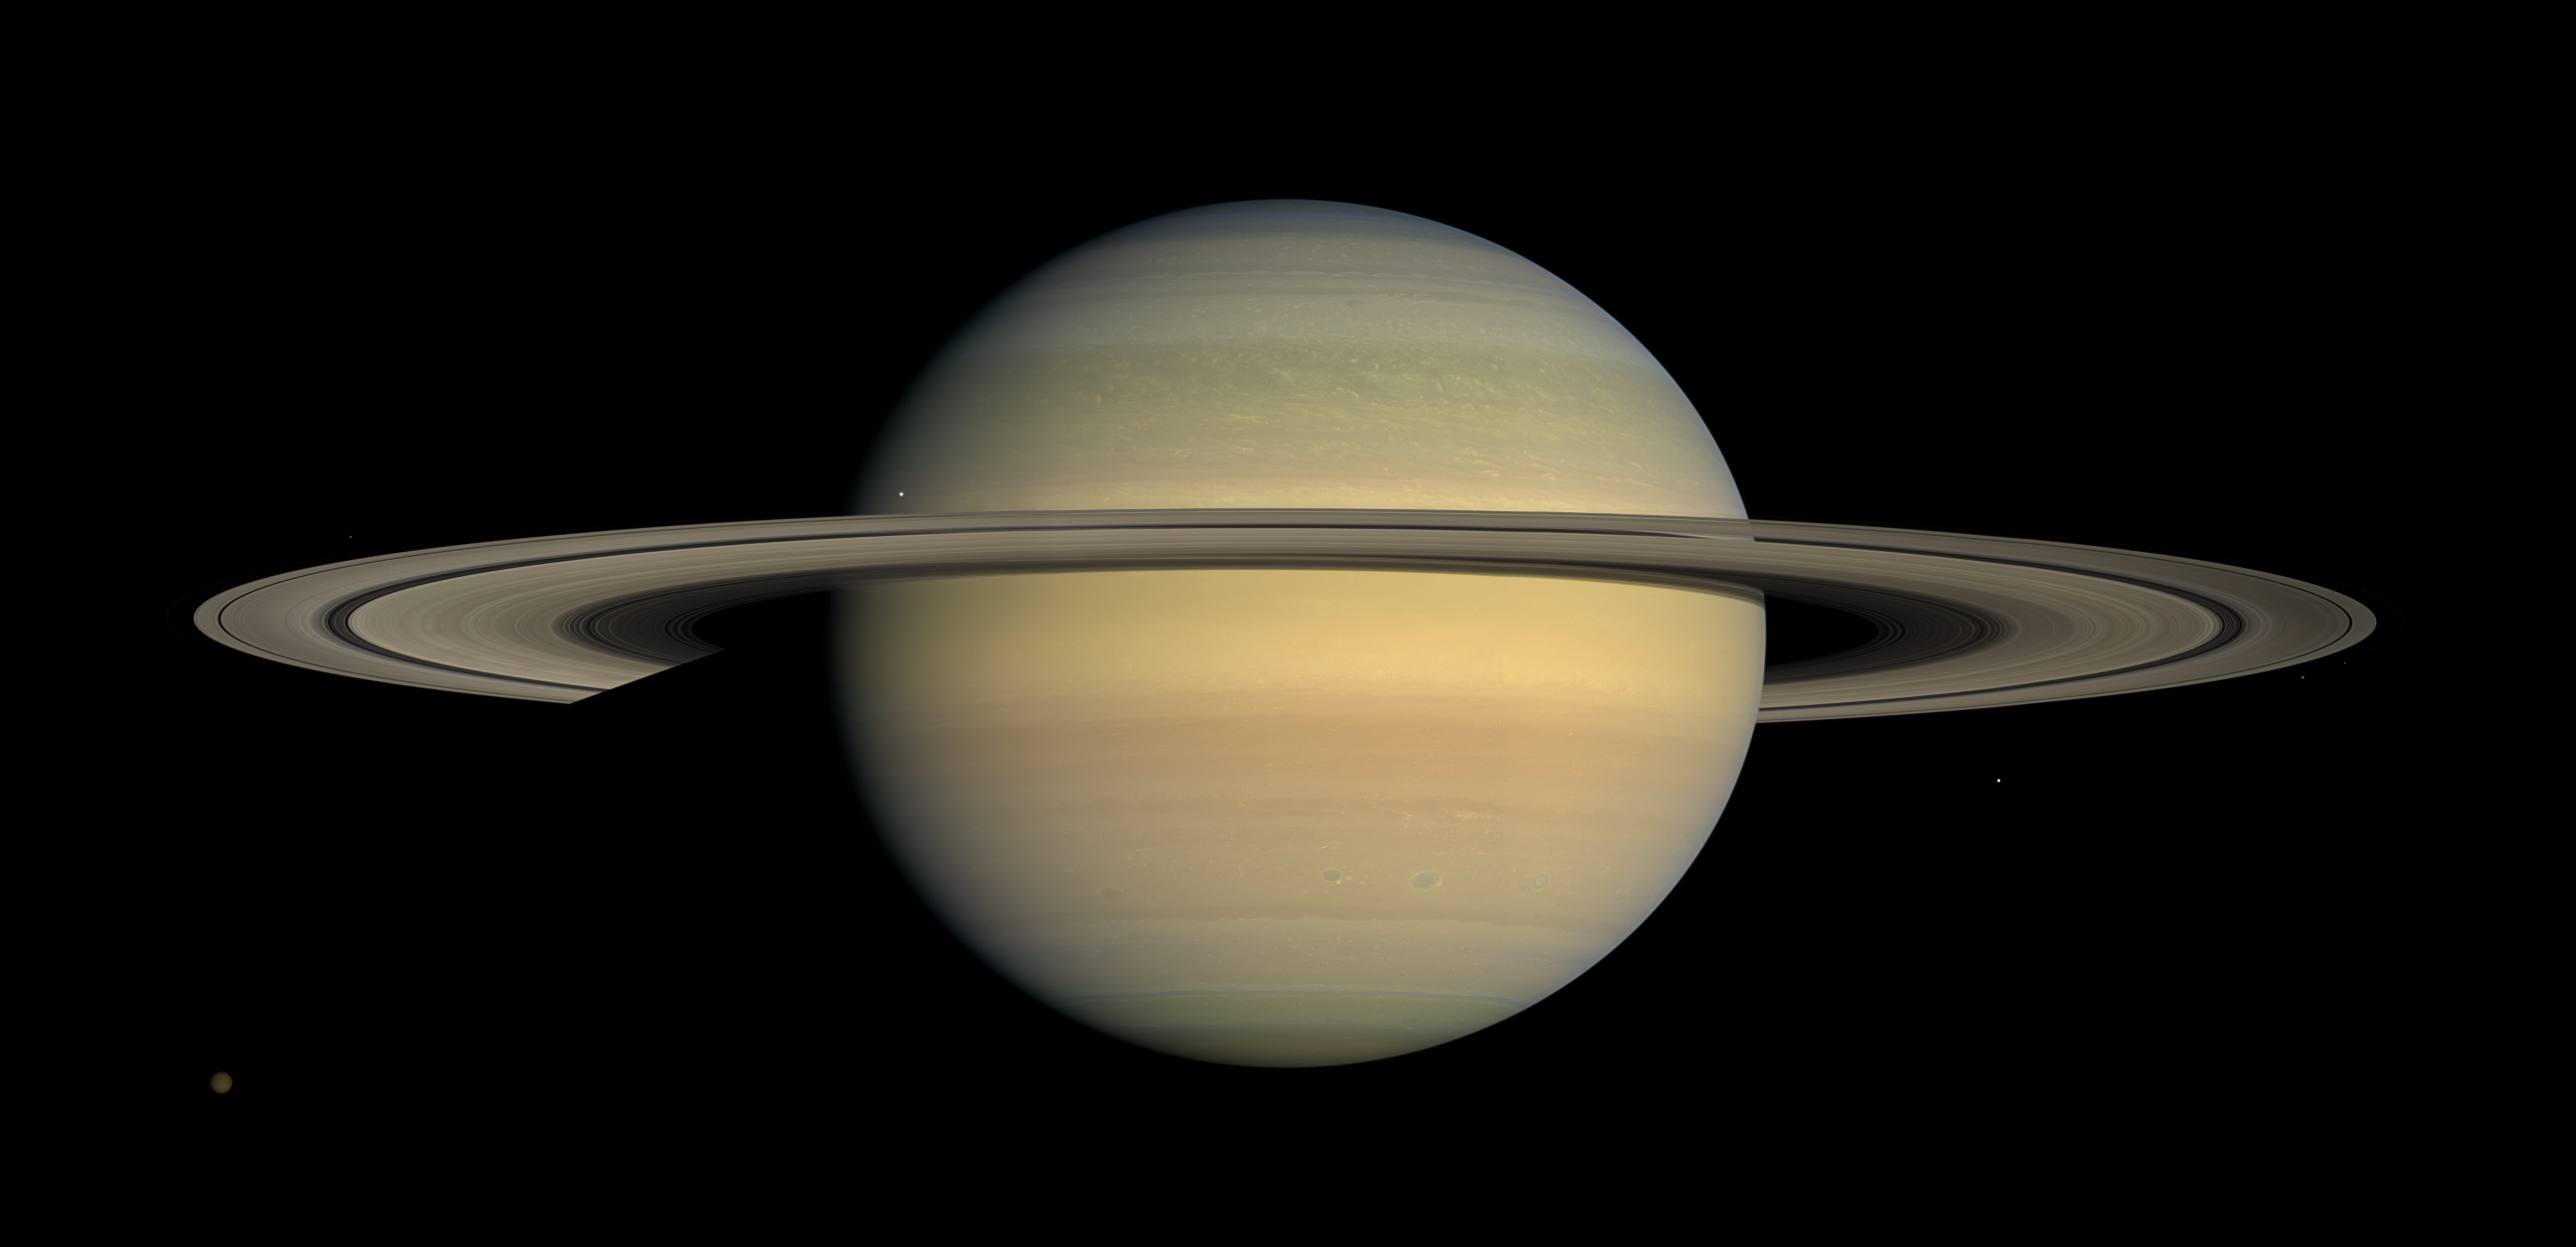 Friday was a Saturn – Day